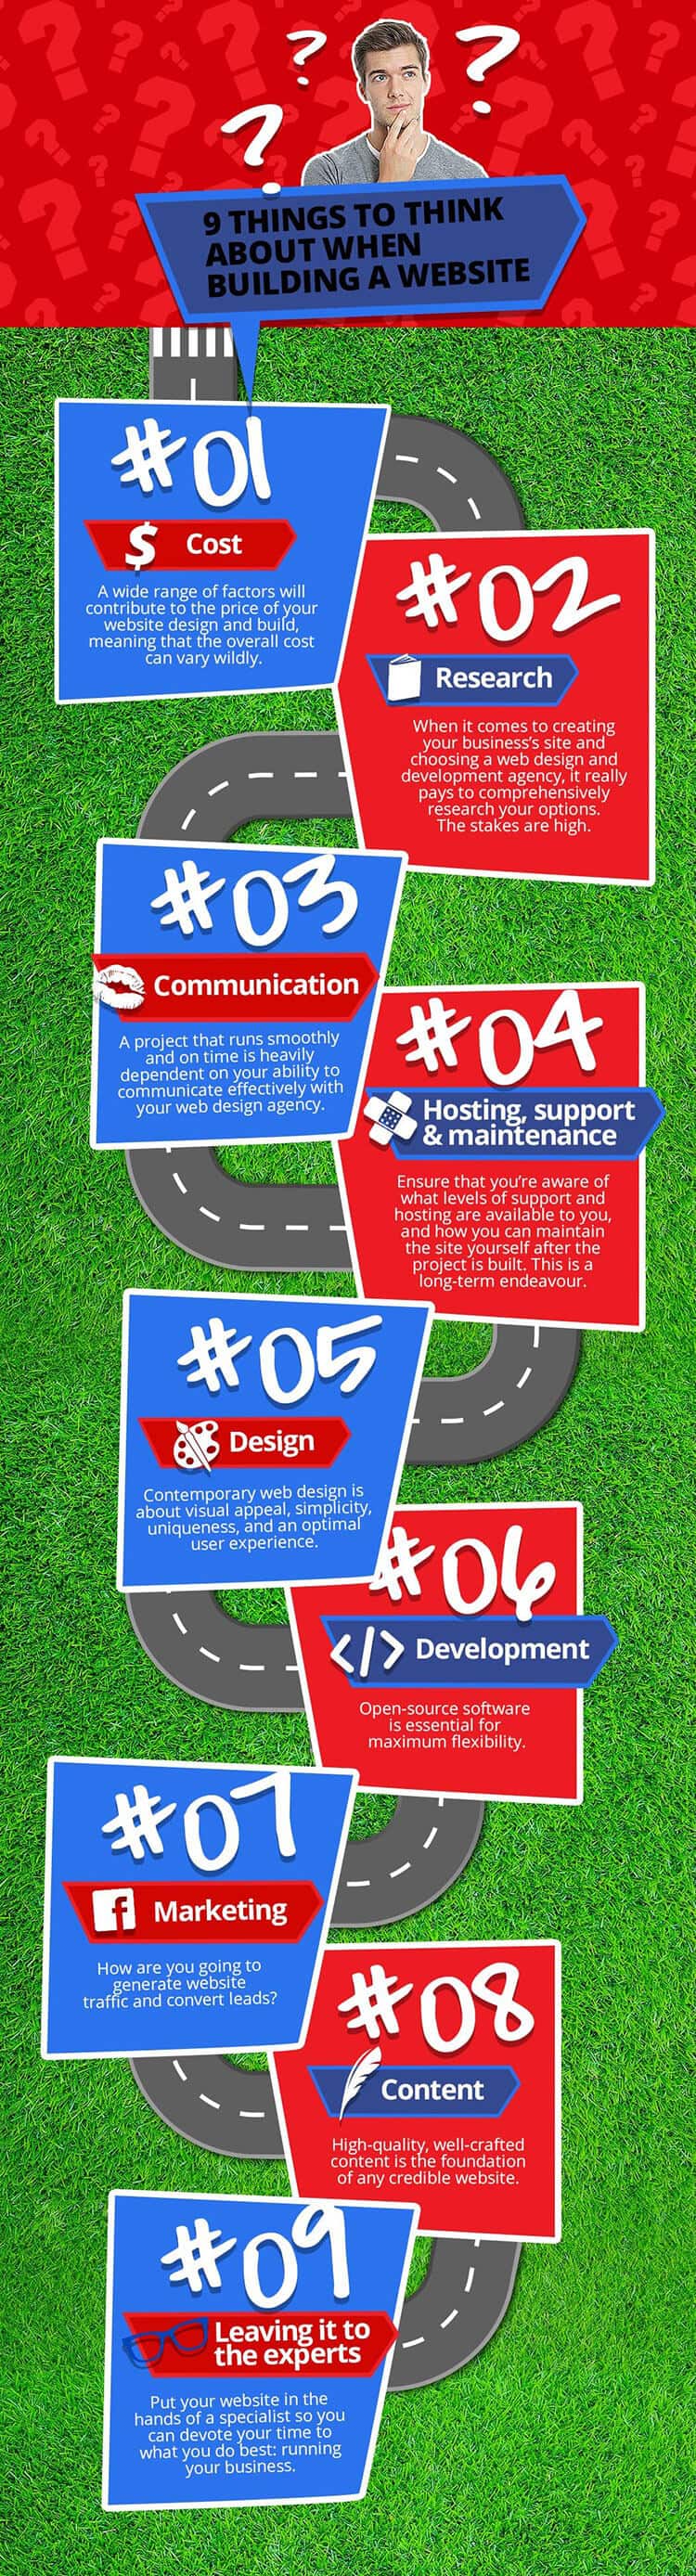 9 Things to Think About Infographic